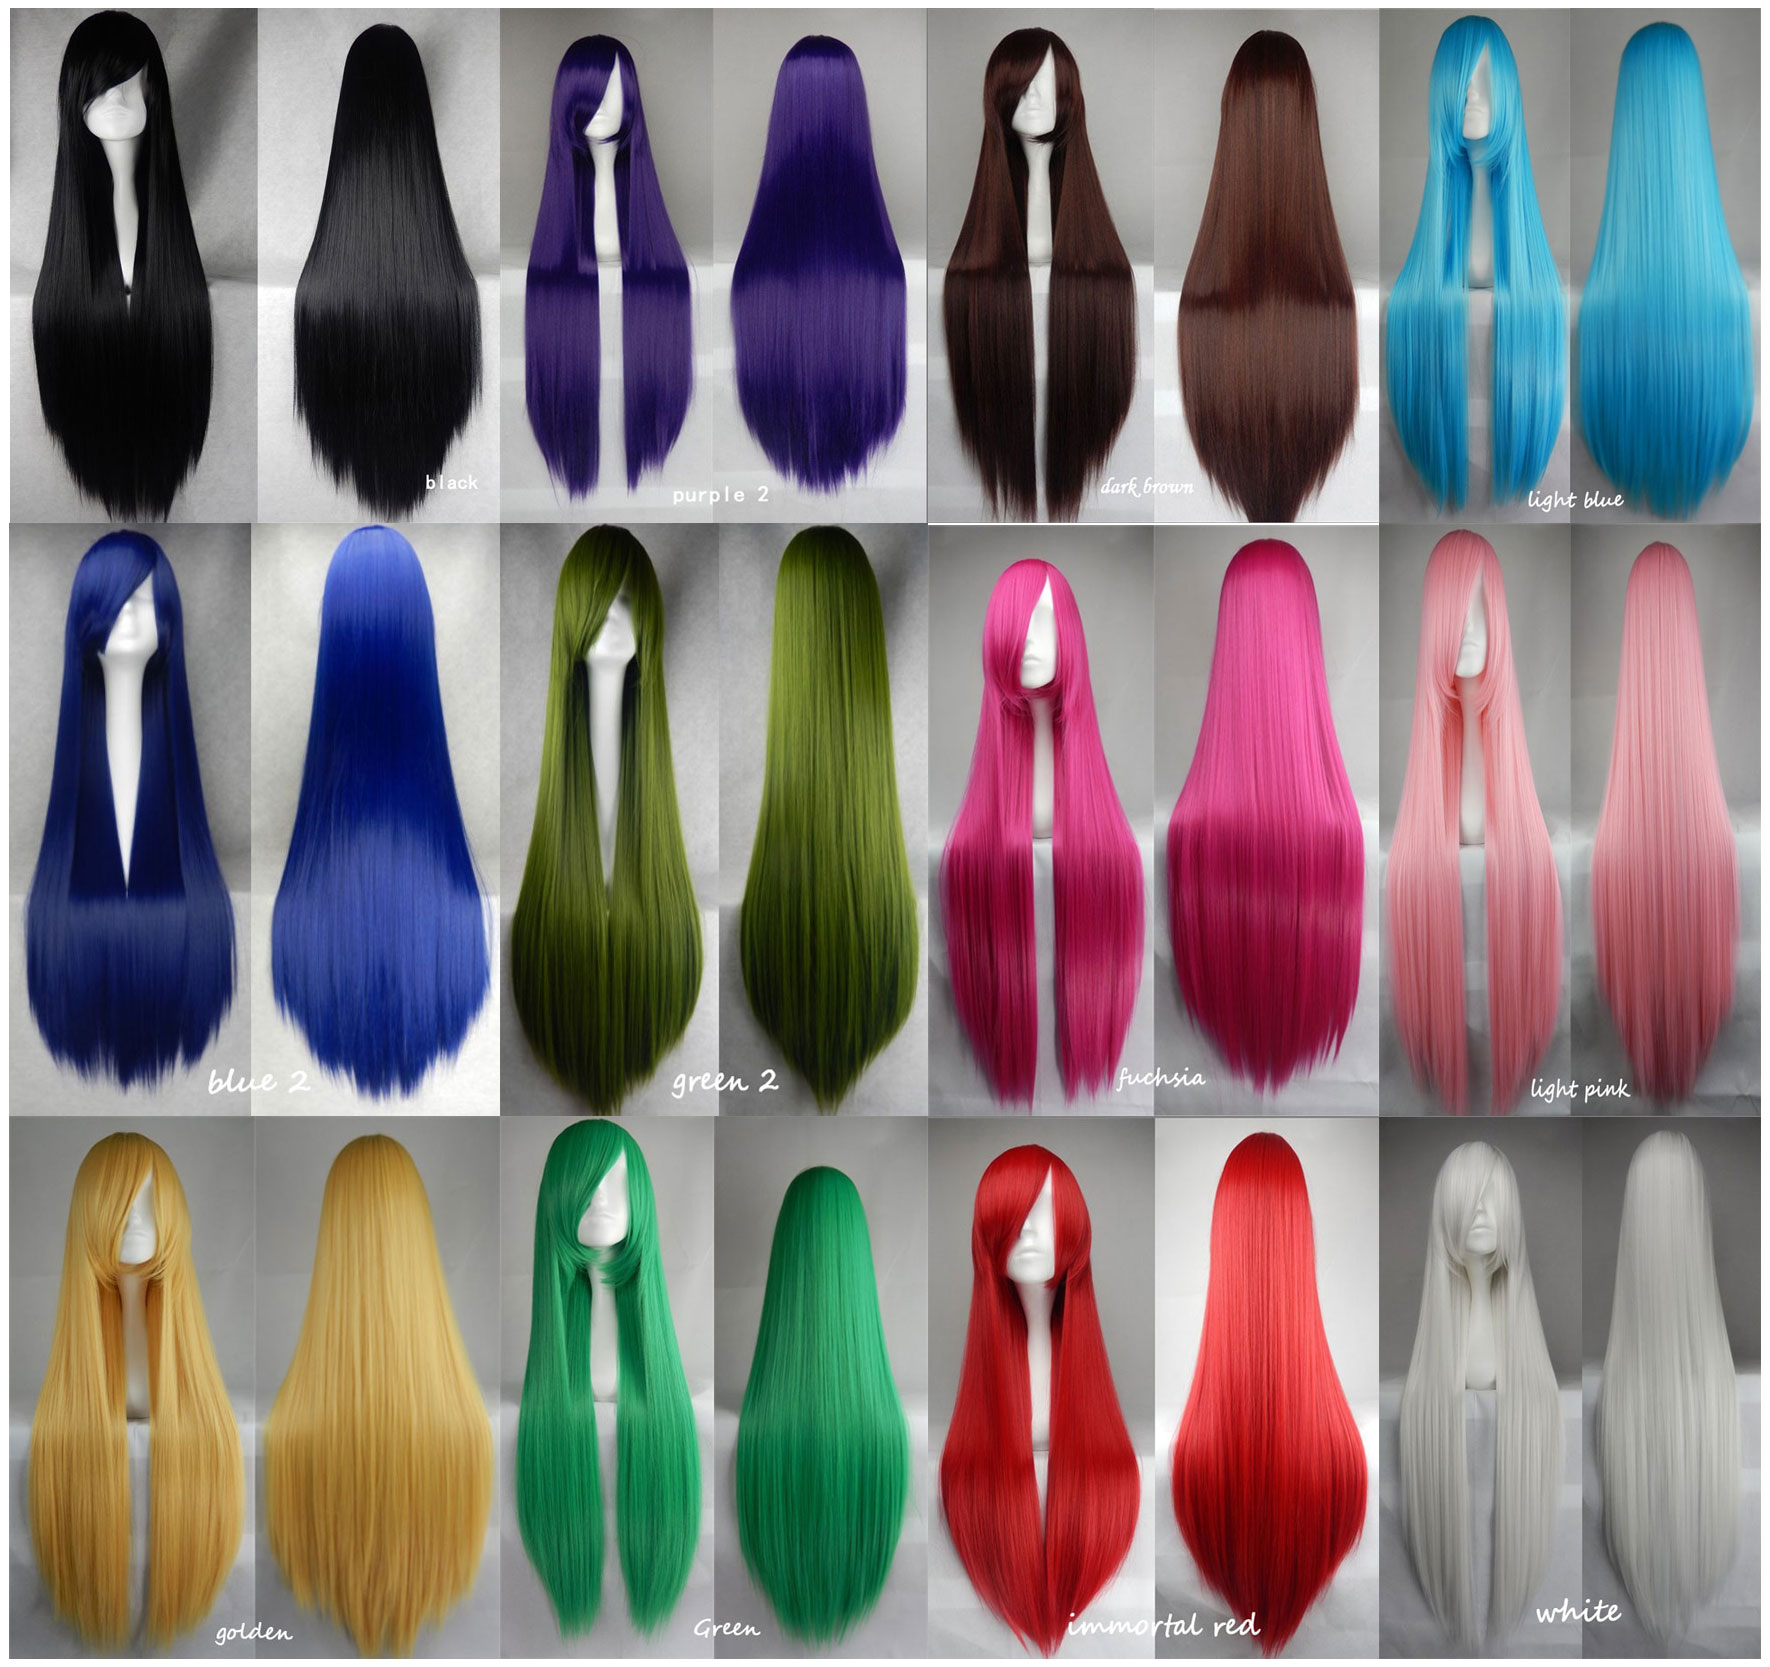 100cm Long Straight Anime Party Cosplay Full Wig + Wig Cap